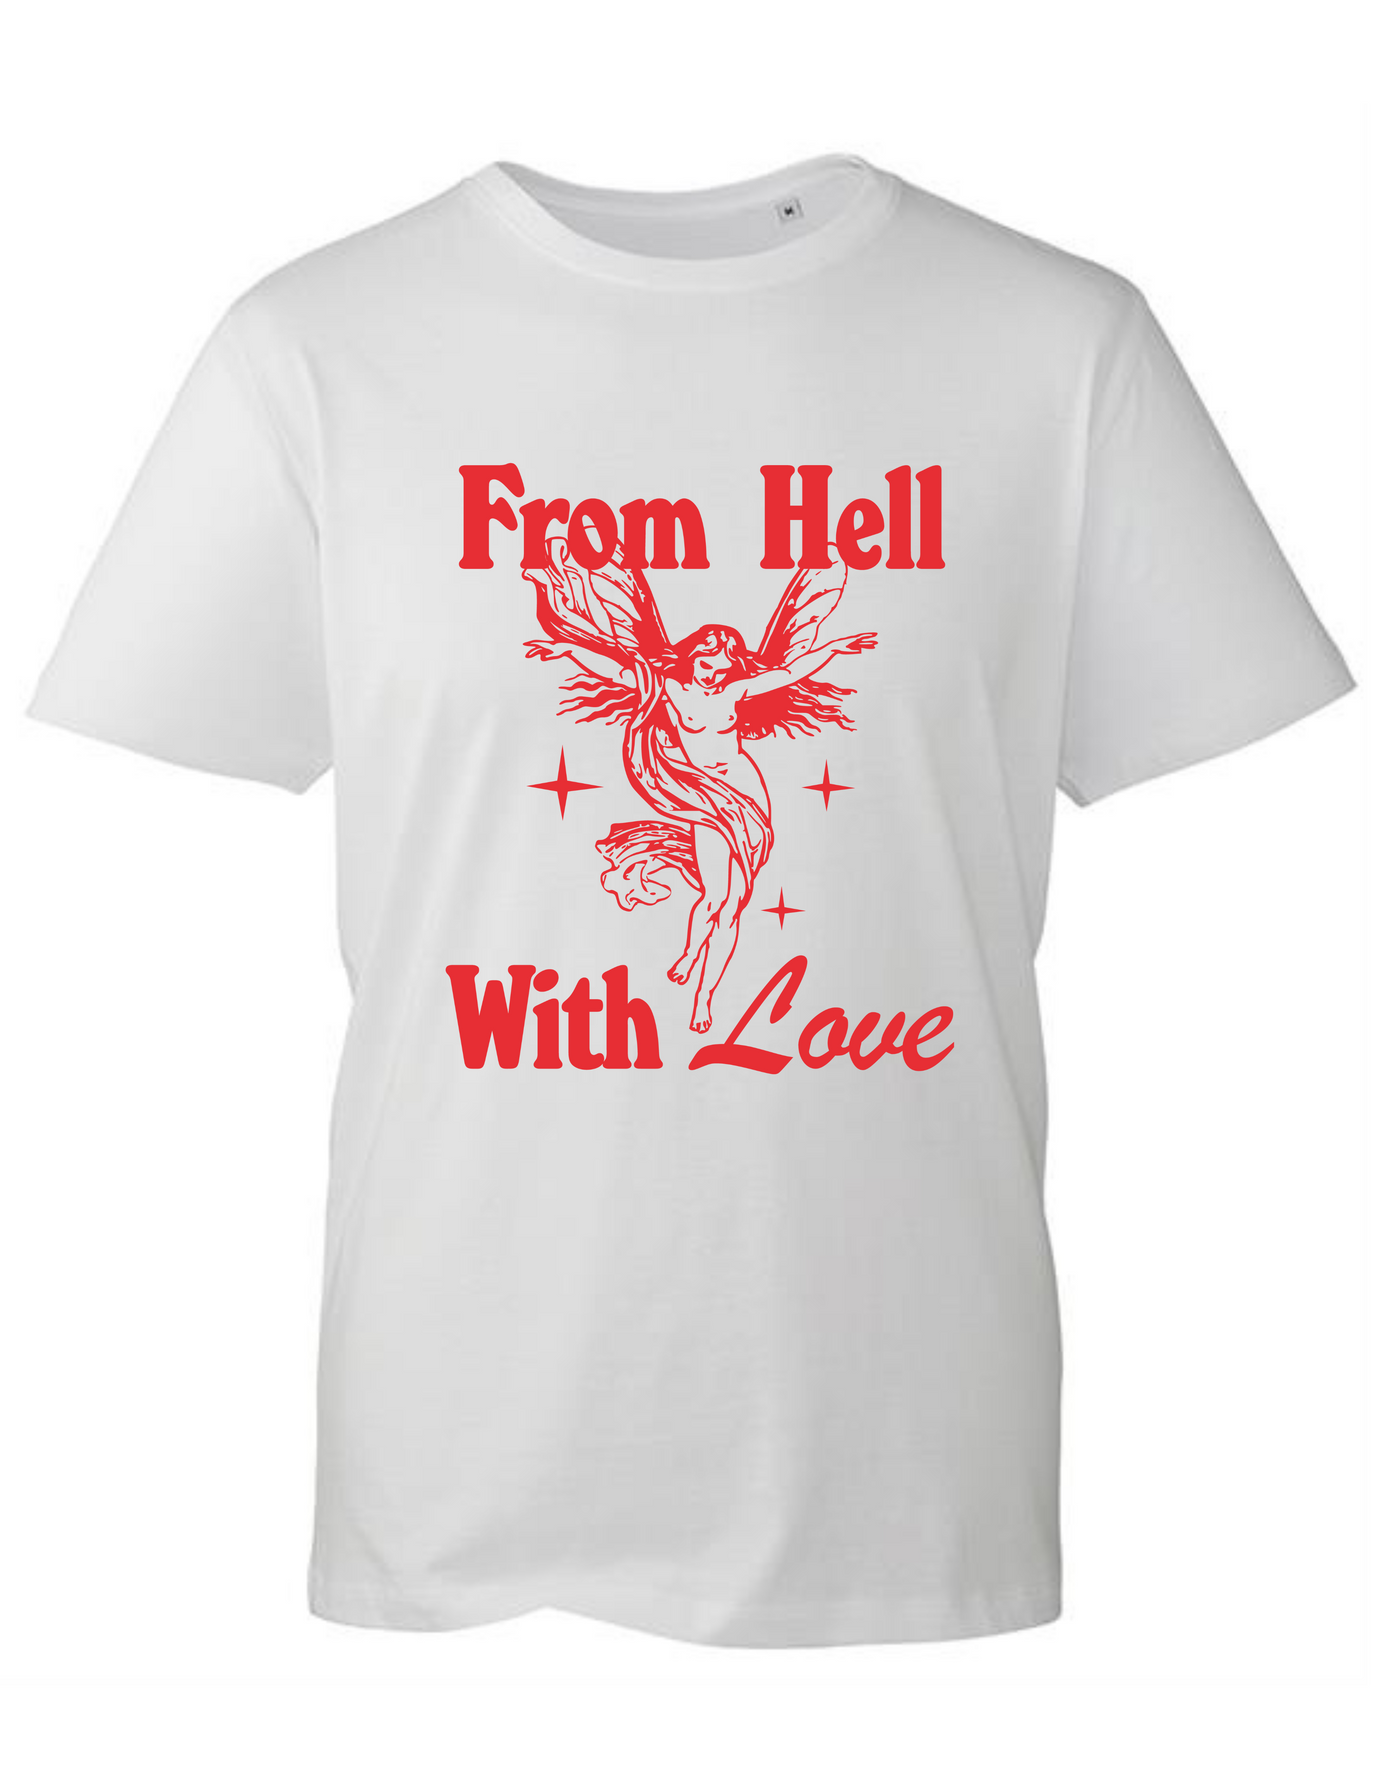 "From Hell With Love" Unisex Organic T-Shirt